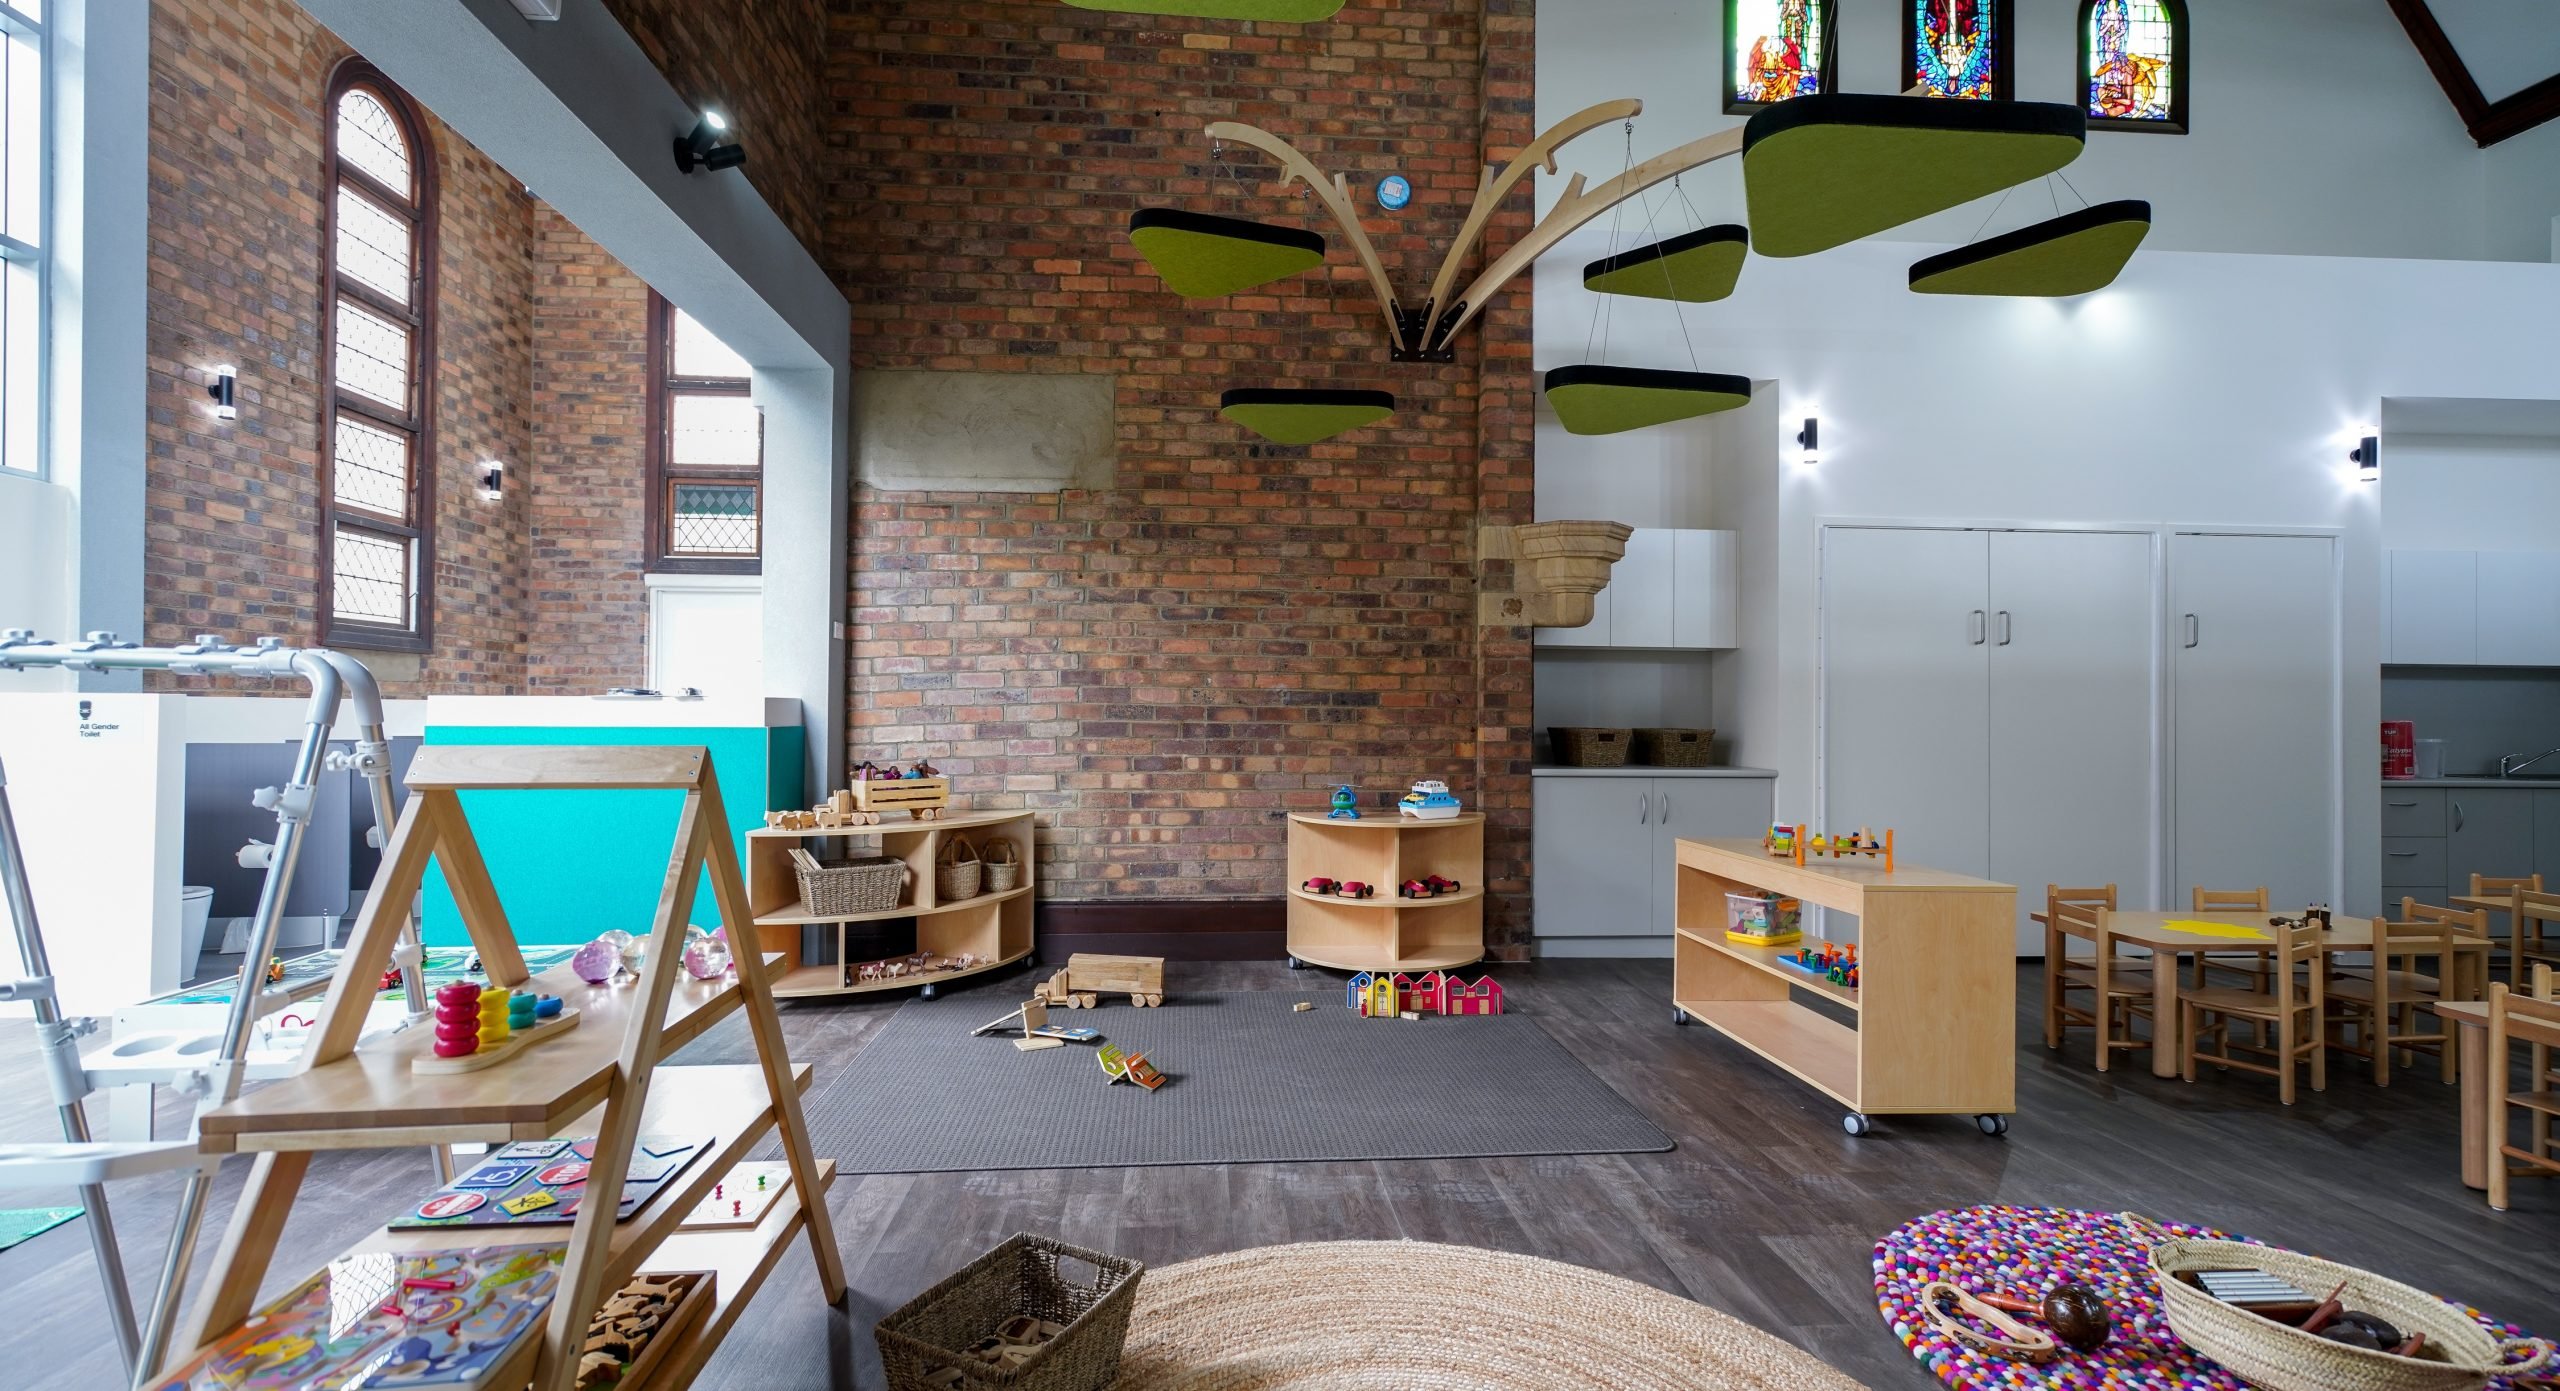 How to utilise Child Care Furniture to create Functional Learning Spaces